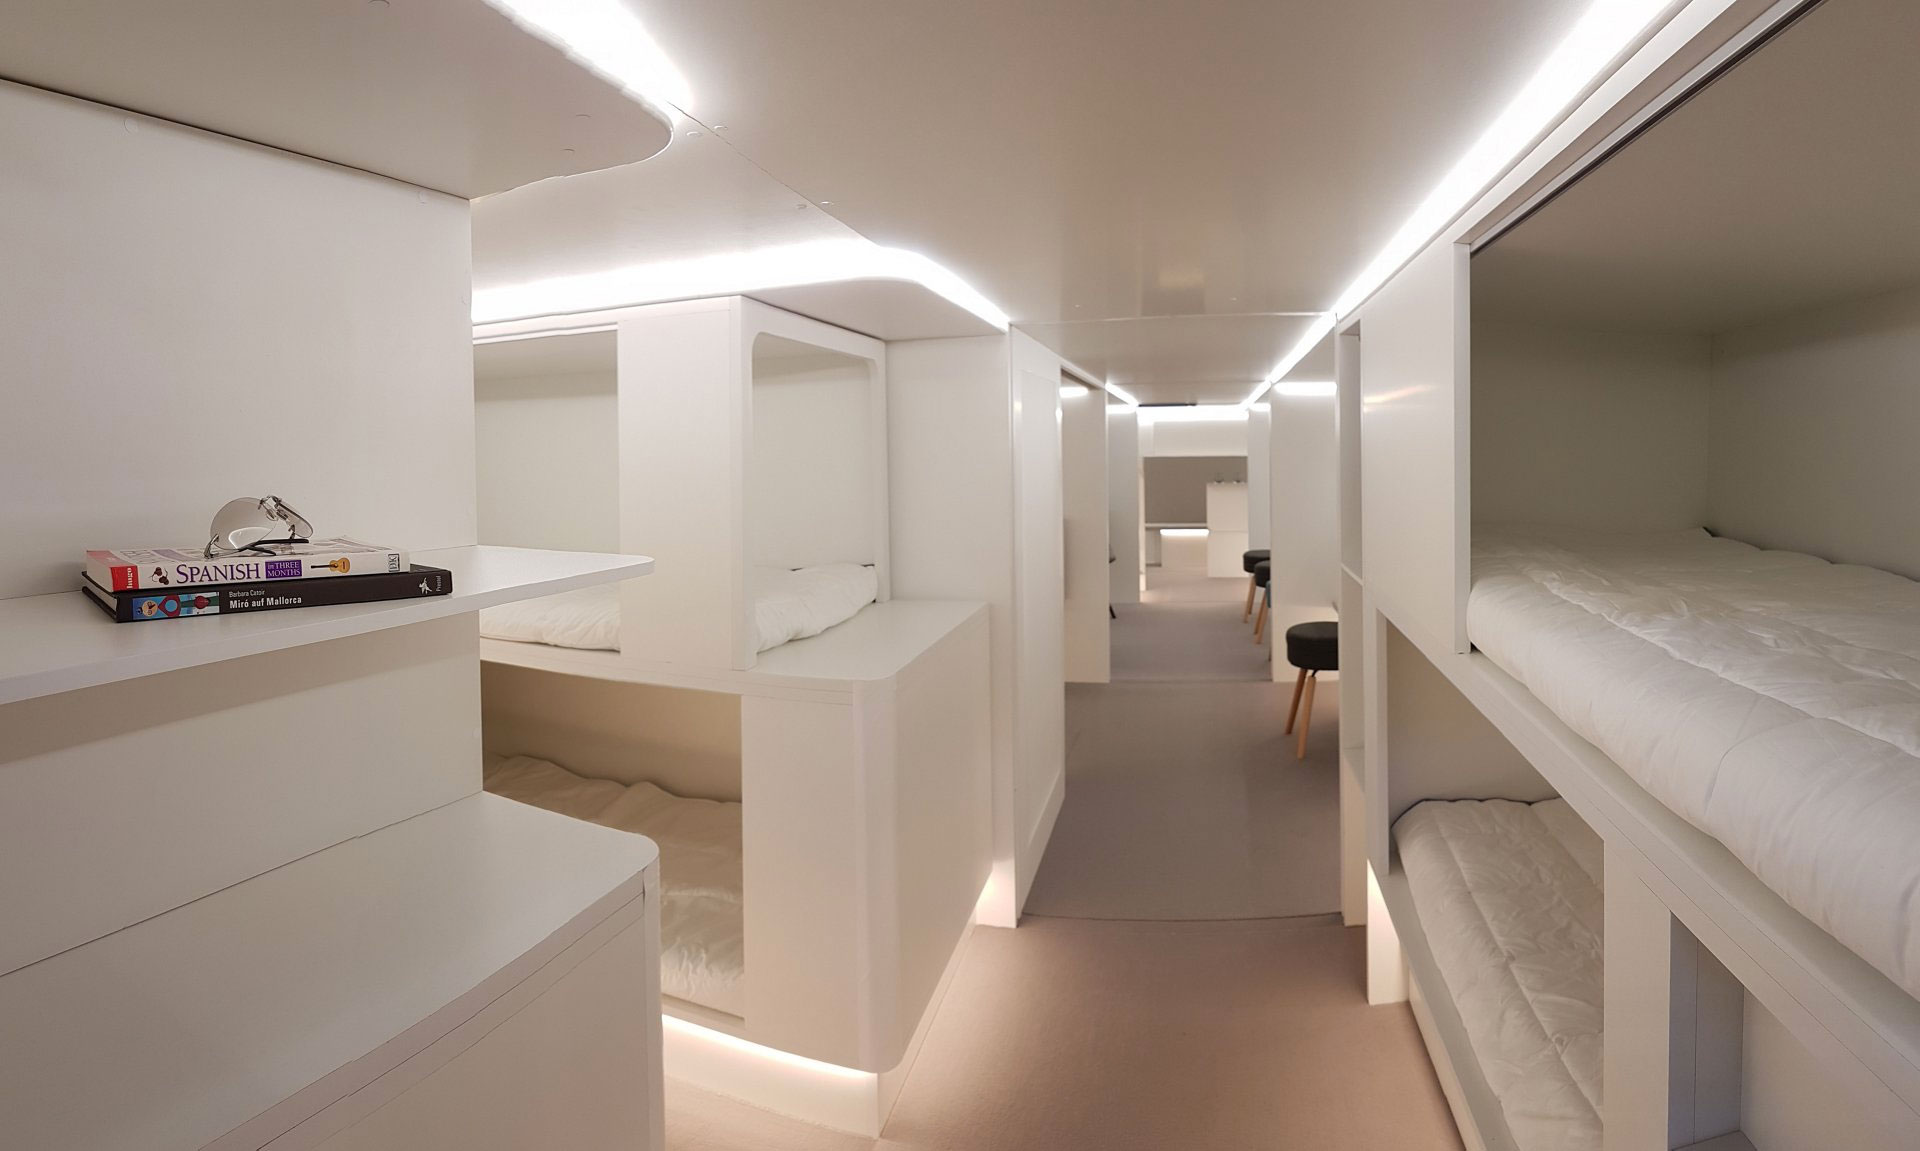 Sleep in a Real Bed on your Next Flight?